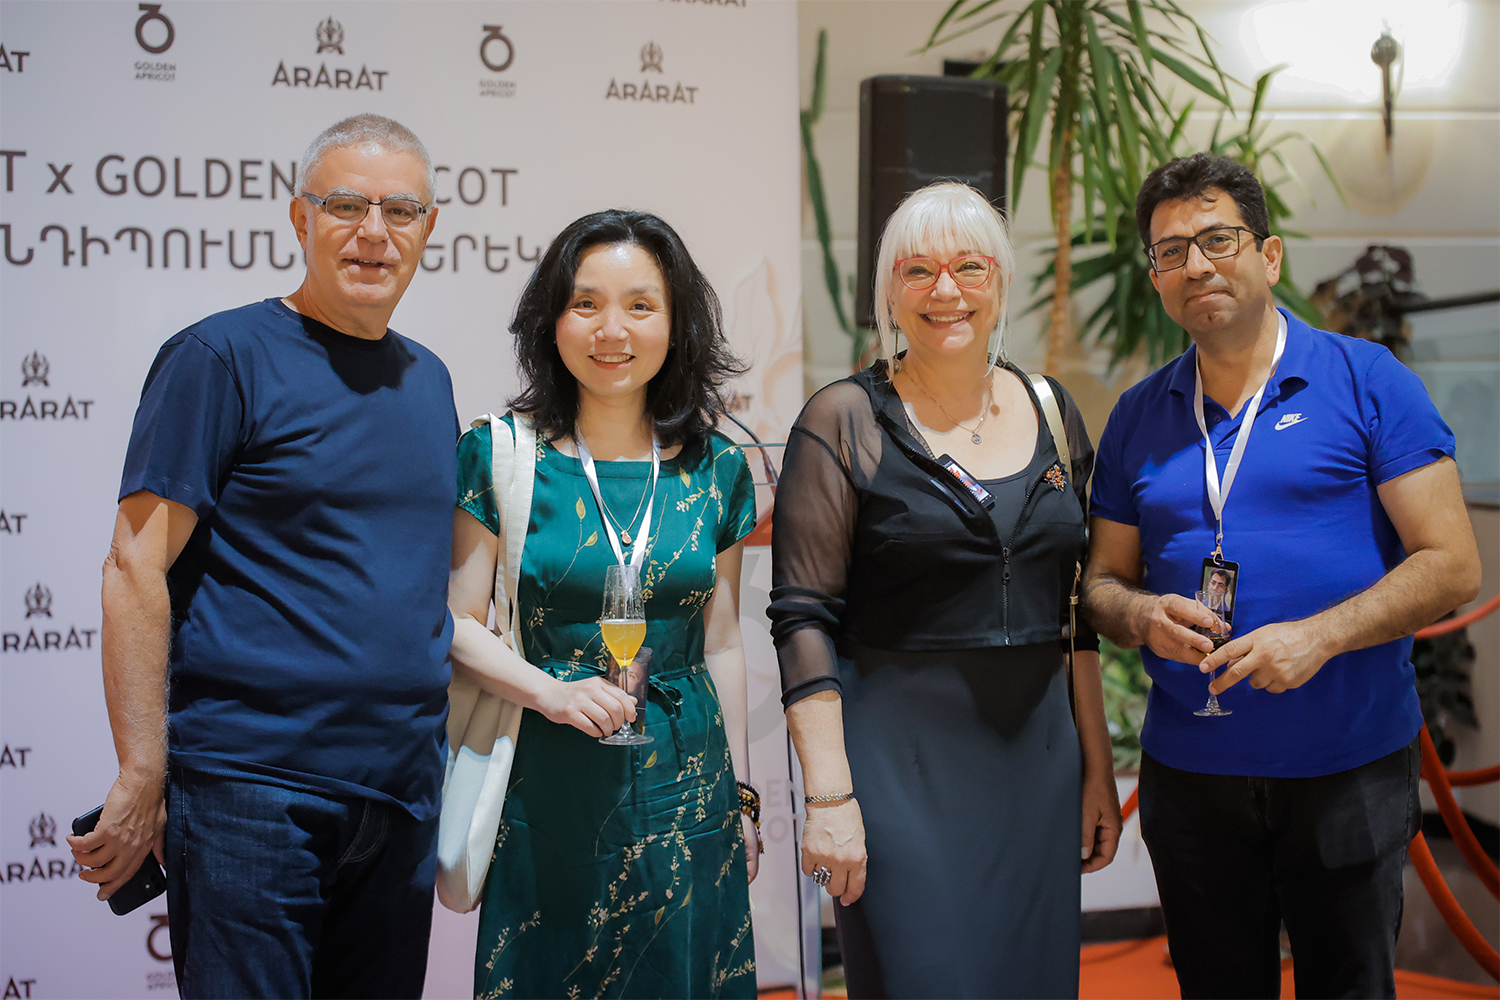 ARARAT hosted “Evening of Heartfelt Encounters” within the Golden Apricot film festival